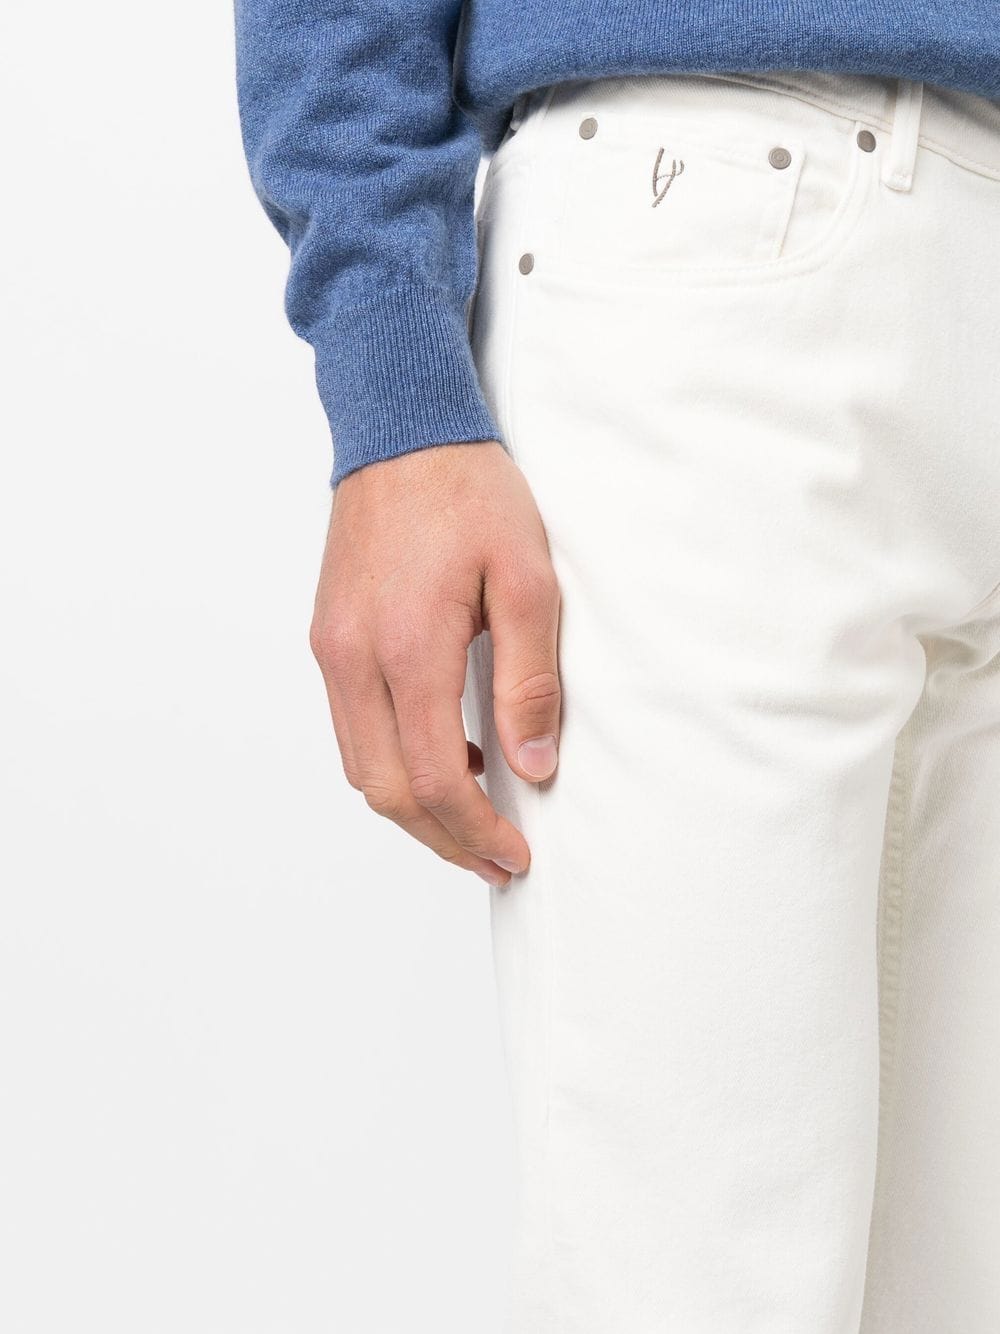 5-pocket straight trousers